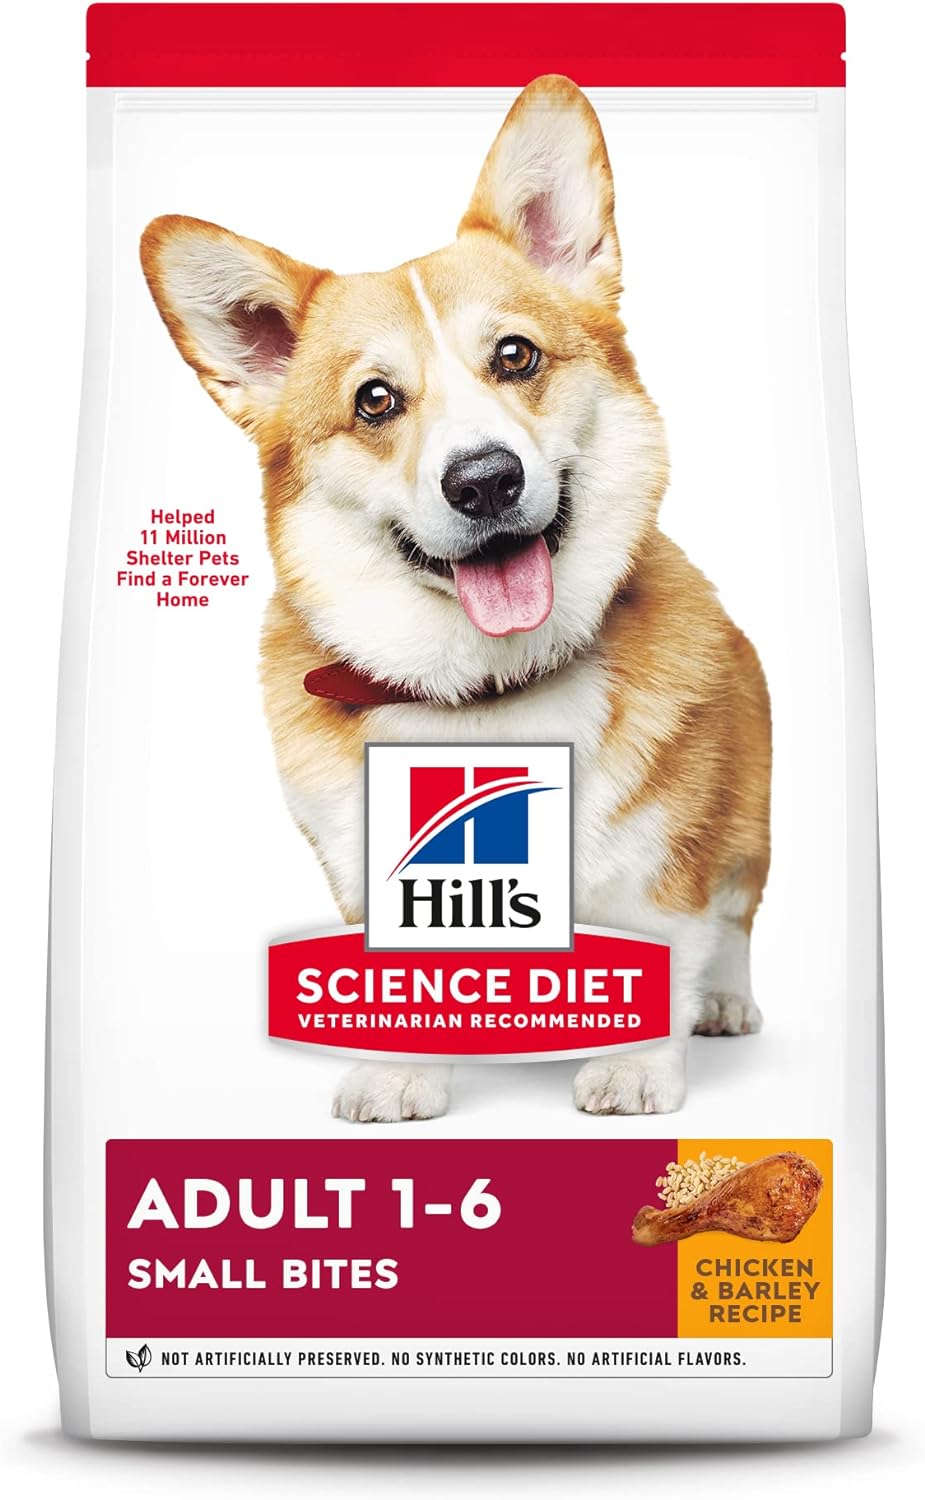 Hill’s Science Diet Adult 1-6 Small Bites Chicken & Barley Recipe Dry Dog Food – Gallery Image 1